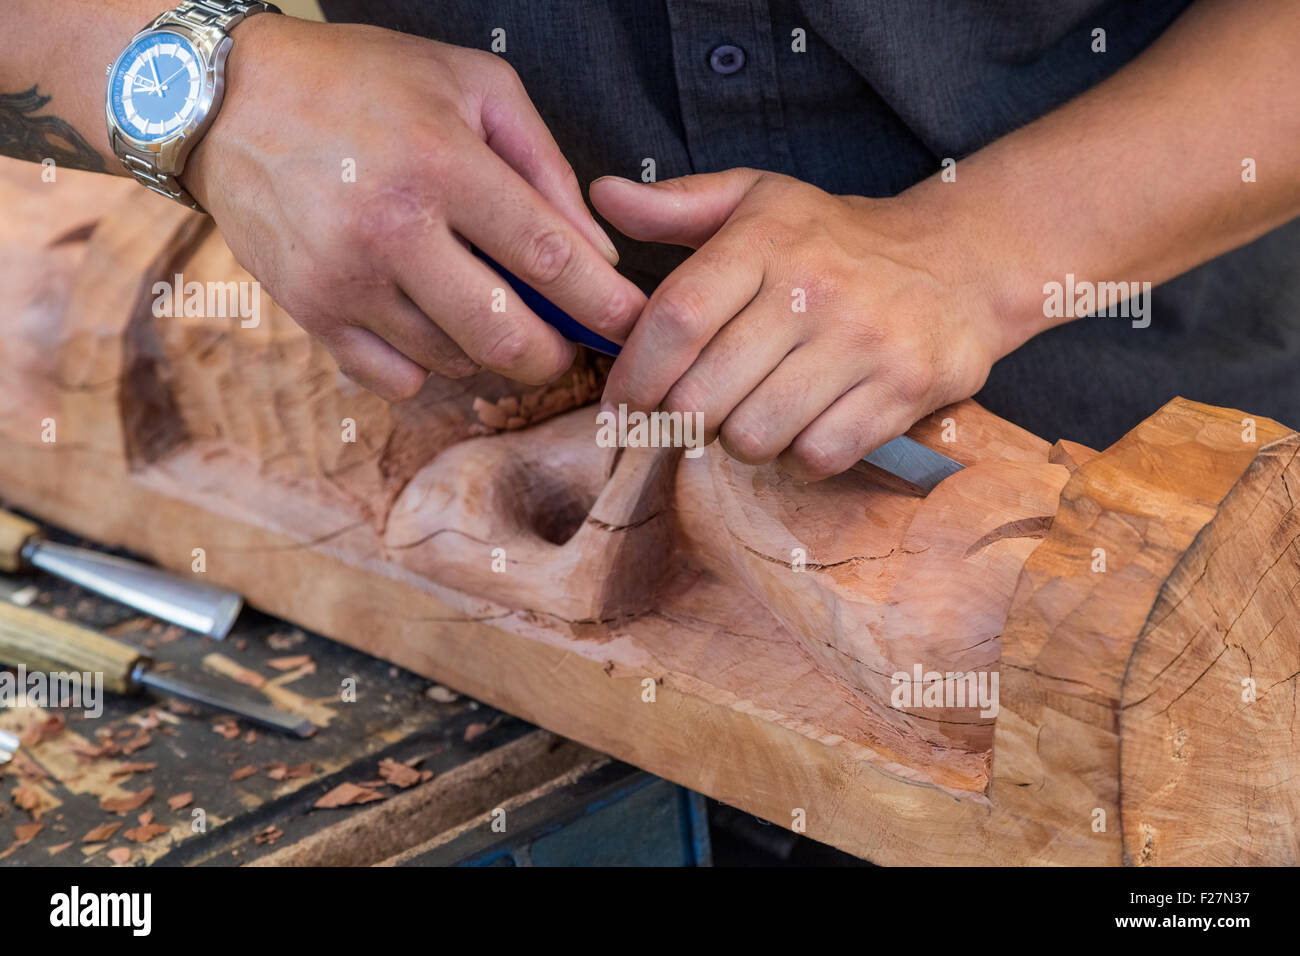 A Maori statue carving in its early stages at a carpentry in Te Puia, Rotorua, New Zealand Stock Photo